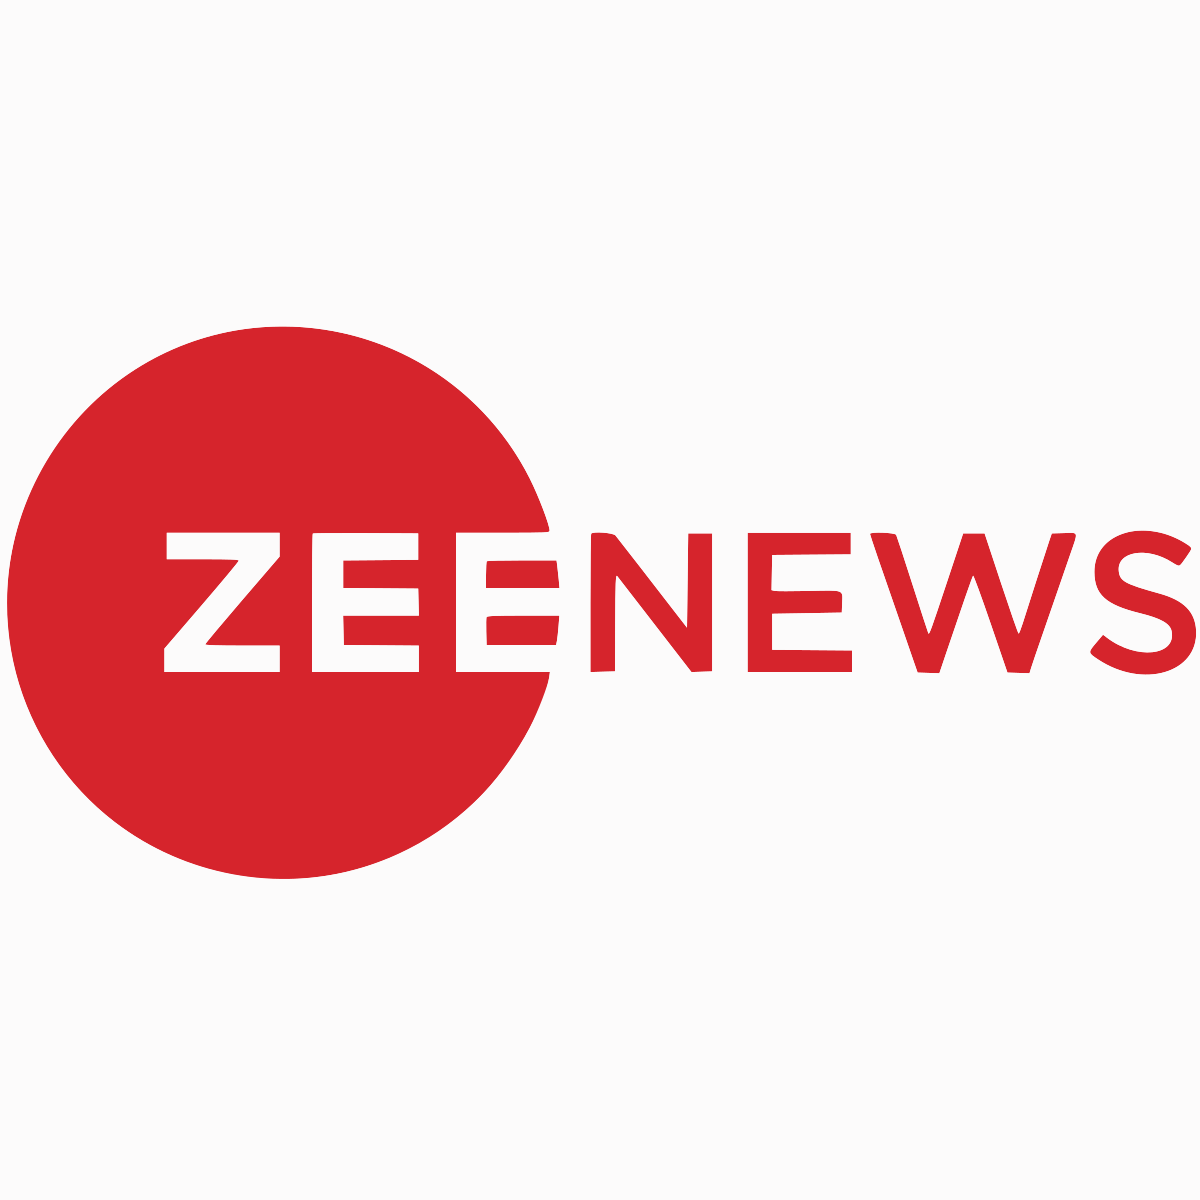 1200px-Zee_news.svg.png